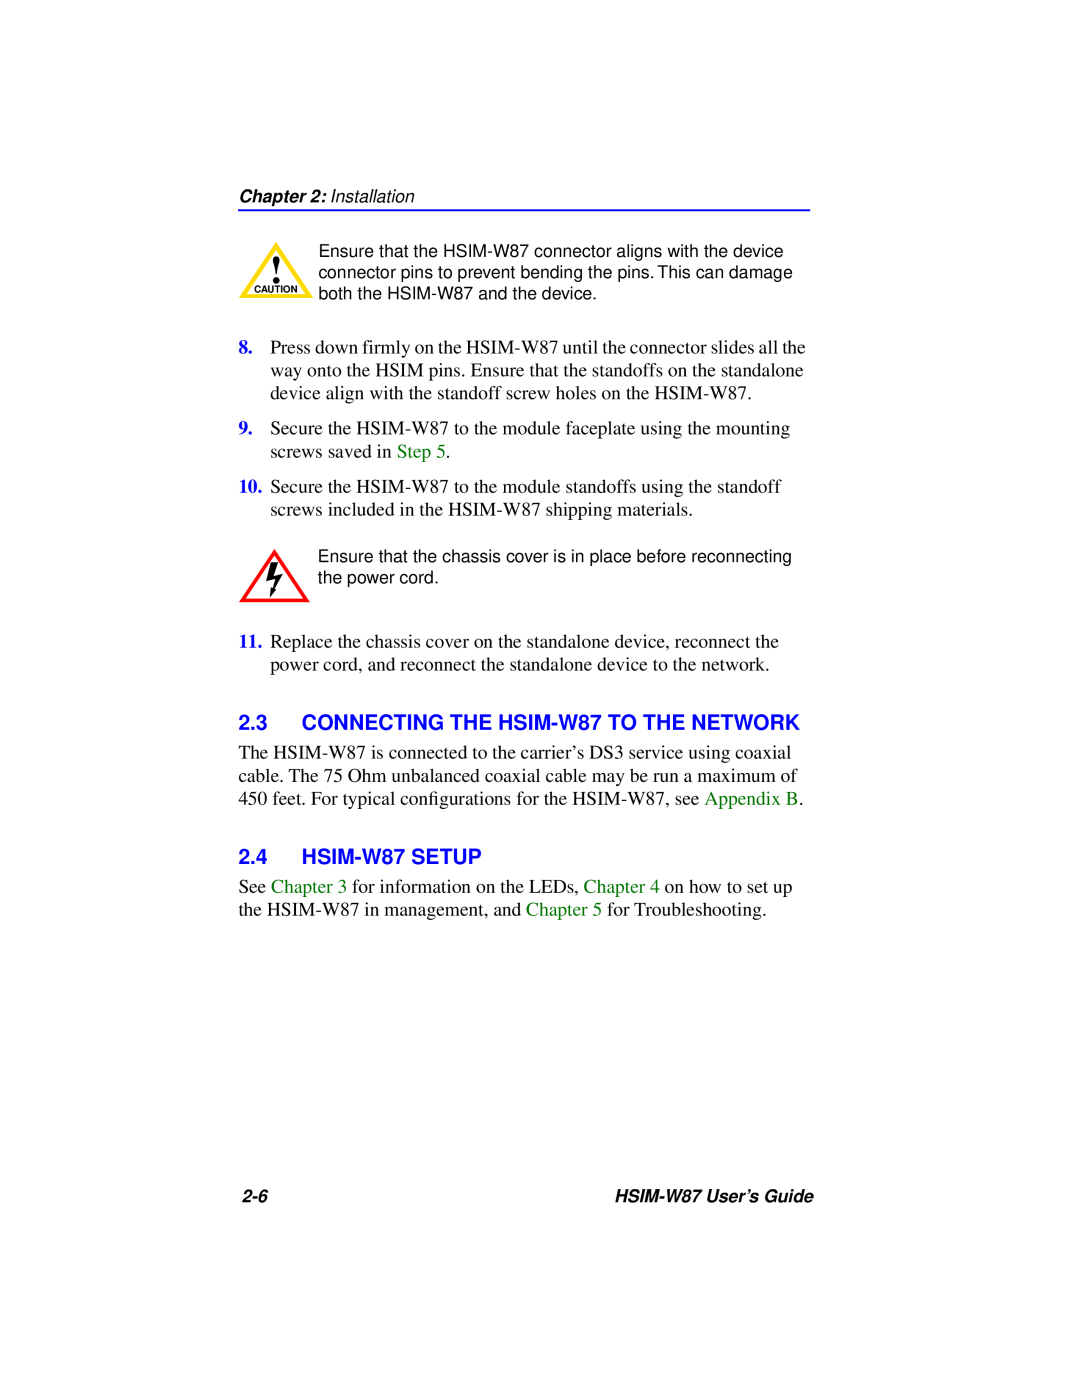 Cabletron Systems manual CONNECTING THE HSIM-W87 TO THE NETWORK, HSIM-W87 SETUP, HSIM-W87 User’s Guide 